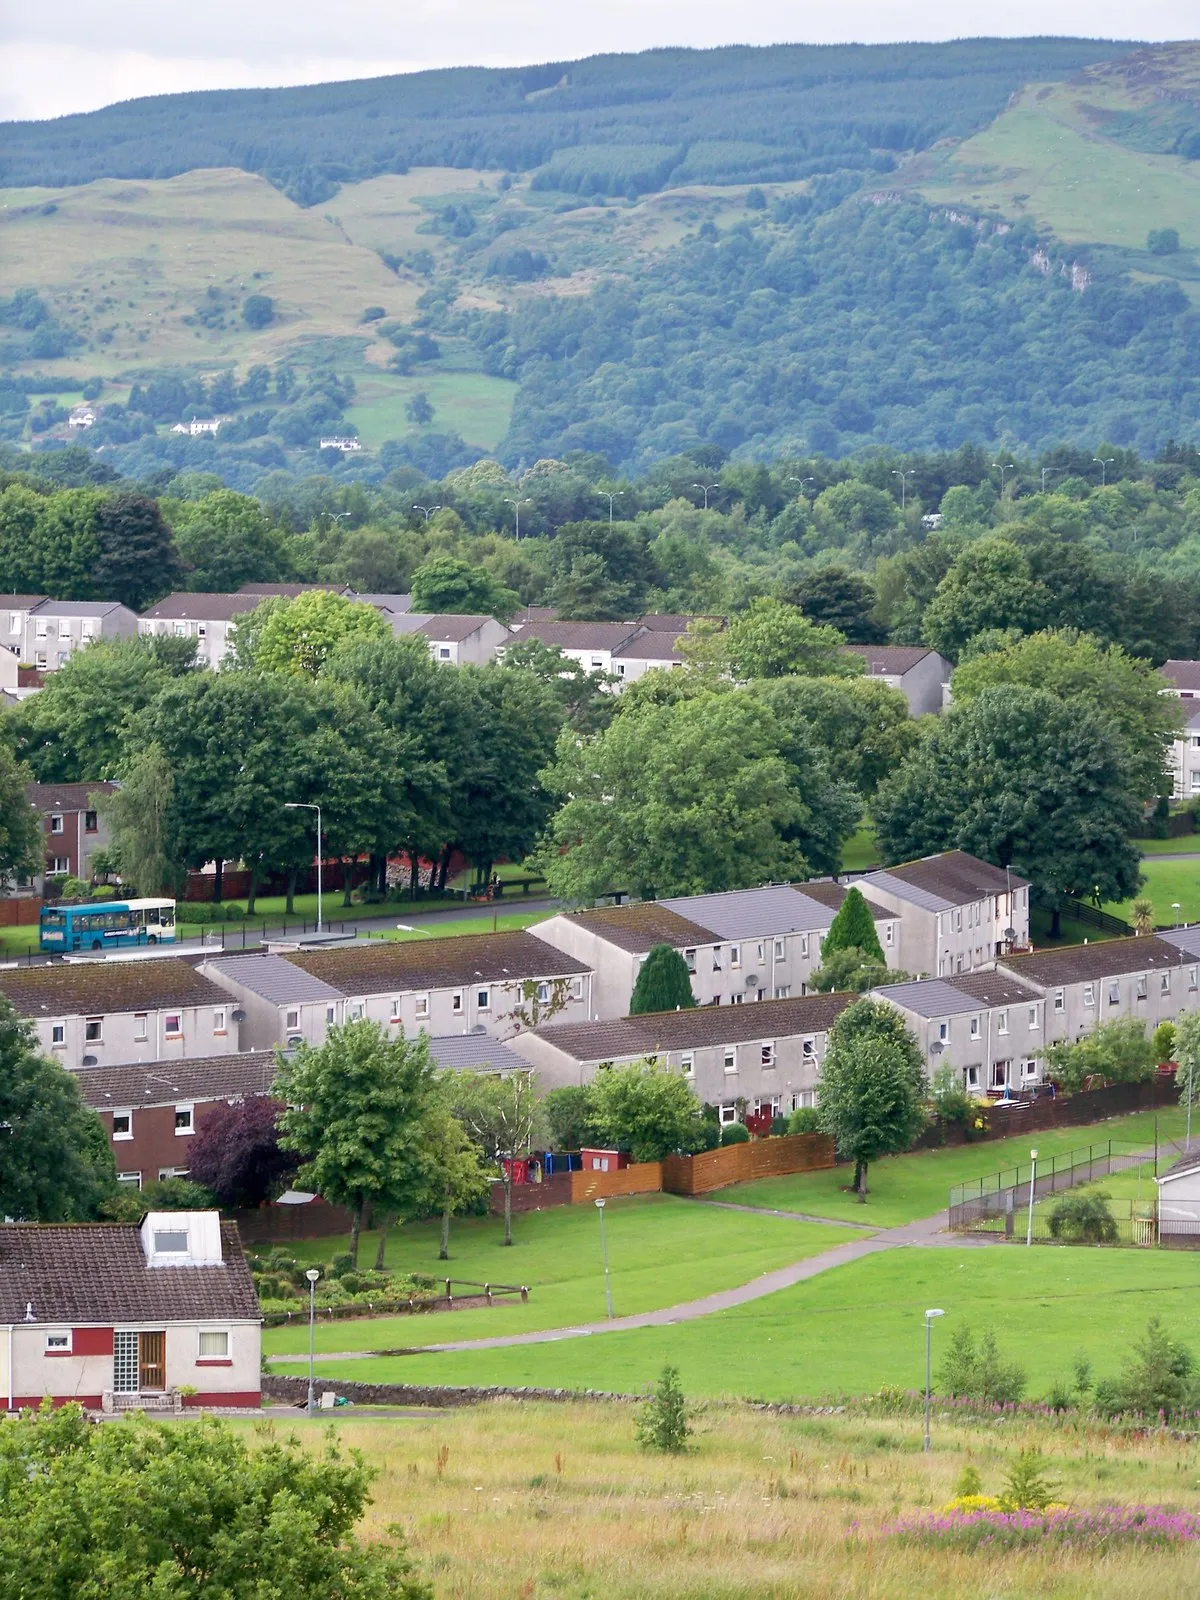 Photo showing: Allison Avenue, Bargarran, Erskine,
Data from Geograph:
Description: A view of terraced housing in Allison Avenue.  In the foreground, an end terrace split-level house at the end of Holms Crescent can be noted.  An Arriva bus travels down Bargarran Road in mid-left of shot.
ICBM: 55.906616512111, -4.467789726679
Location: (about 1 km from) near to Erskine, Renfrewshire, Great Britain.